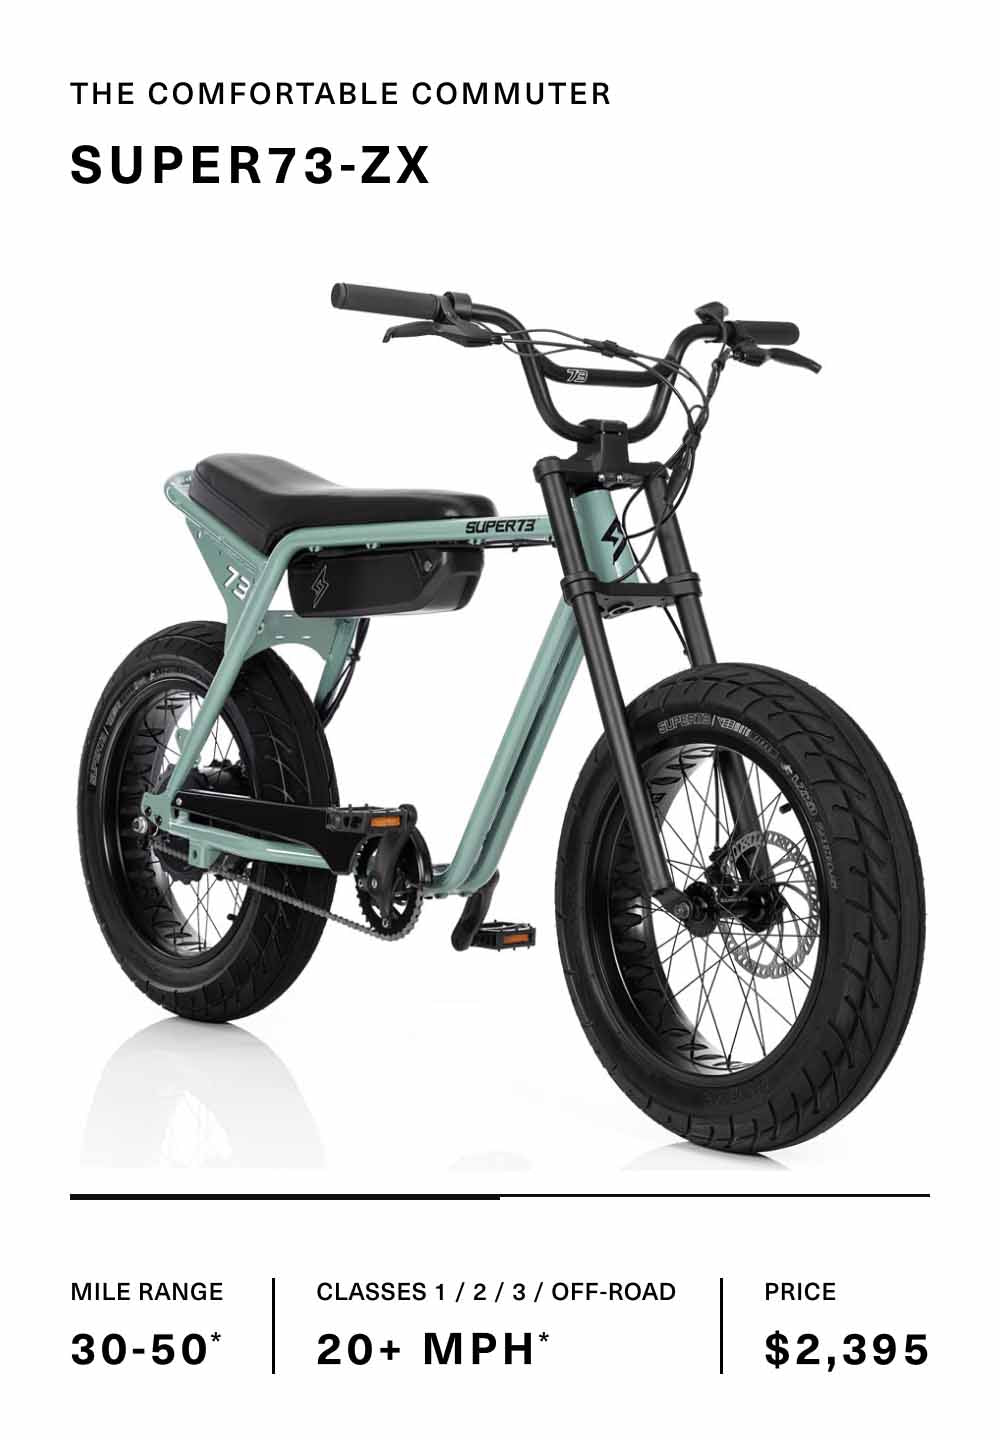 Super73 Agave Green ZX bike specifications and pricing. Range 30-50. Classes 1,2,3,Off Road - 20+ MPH. Price $2395